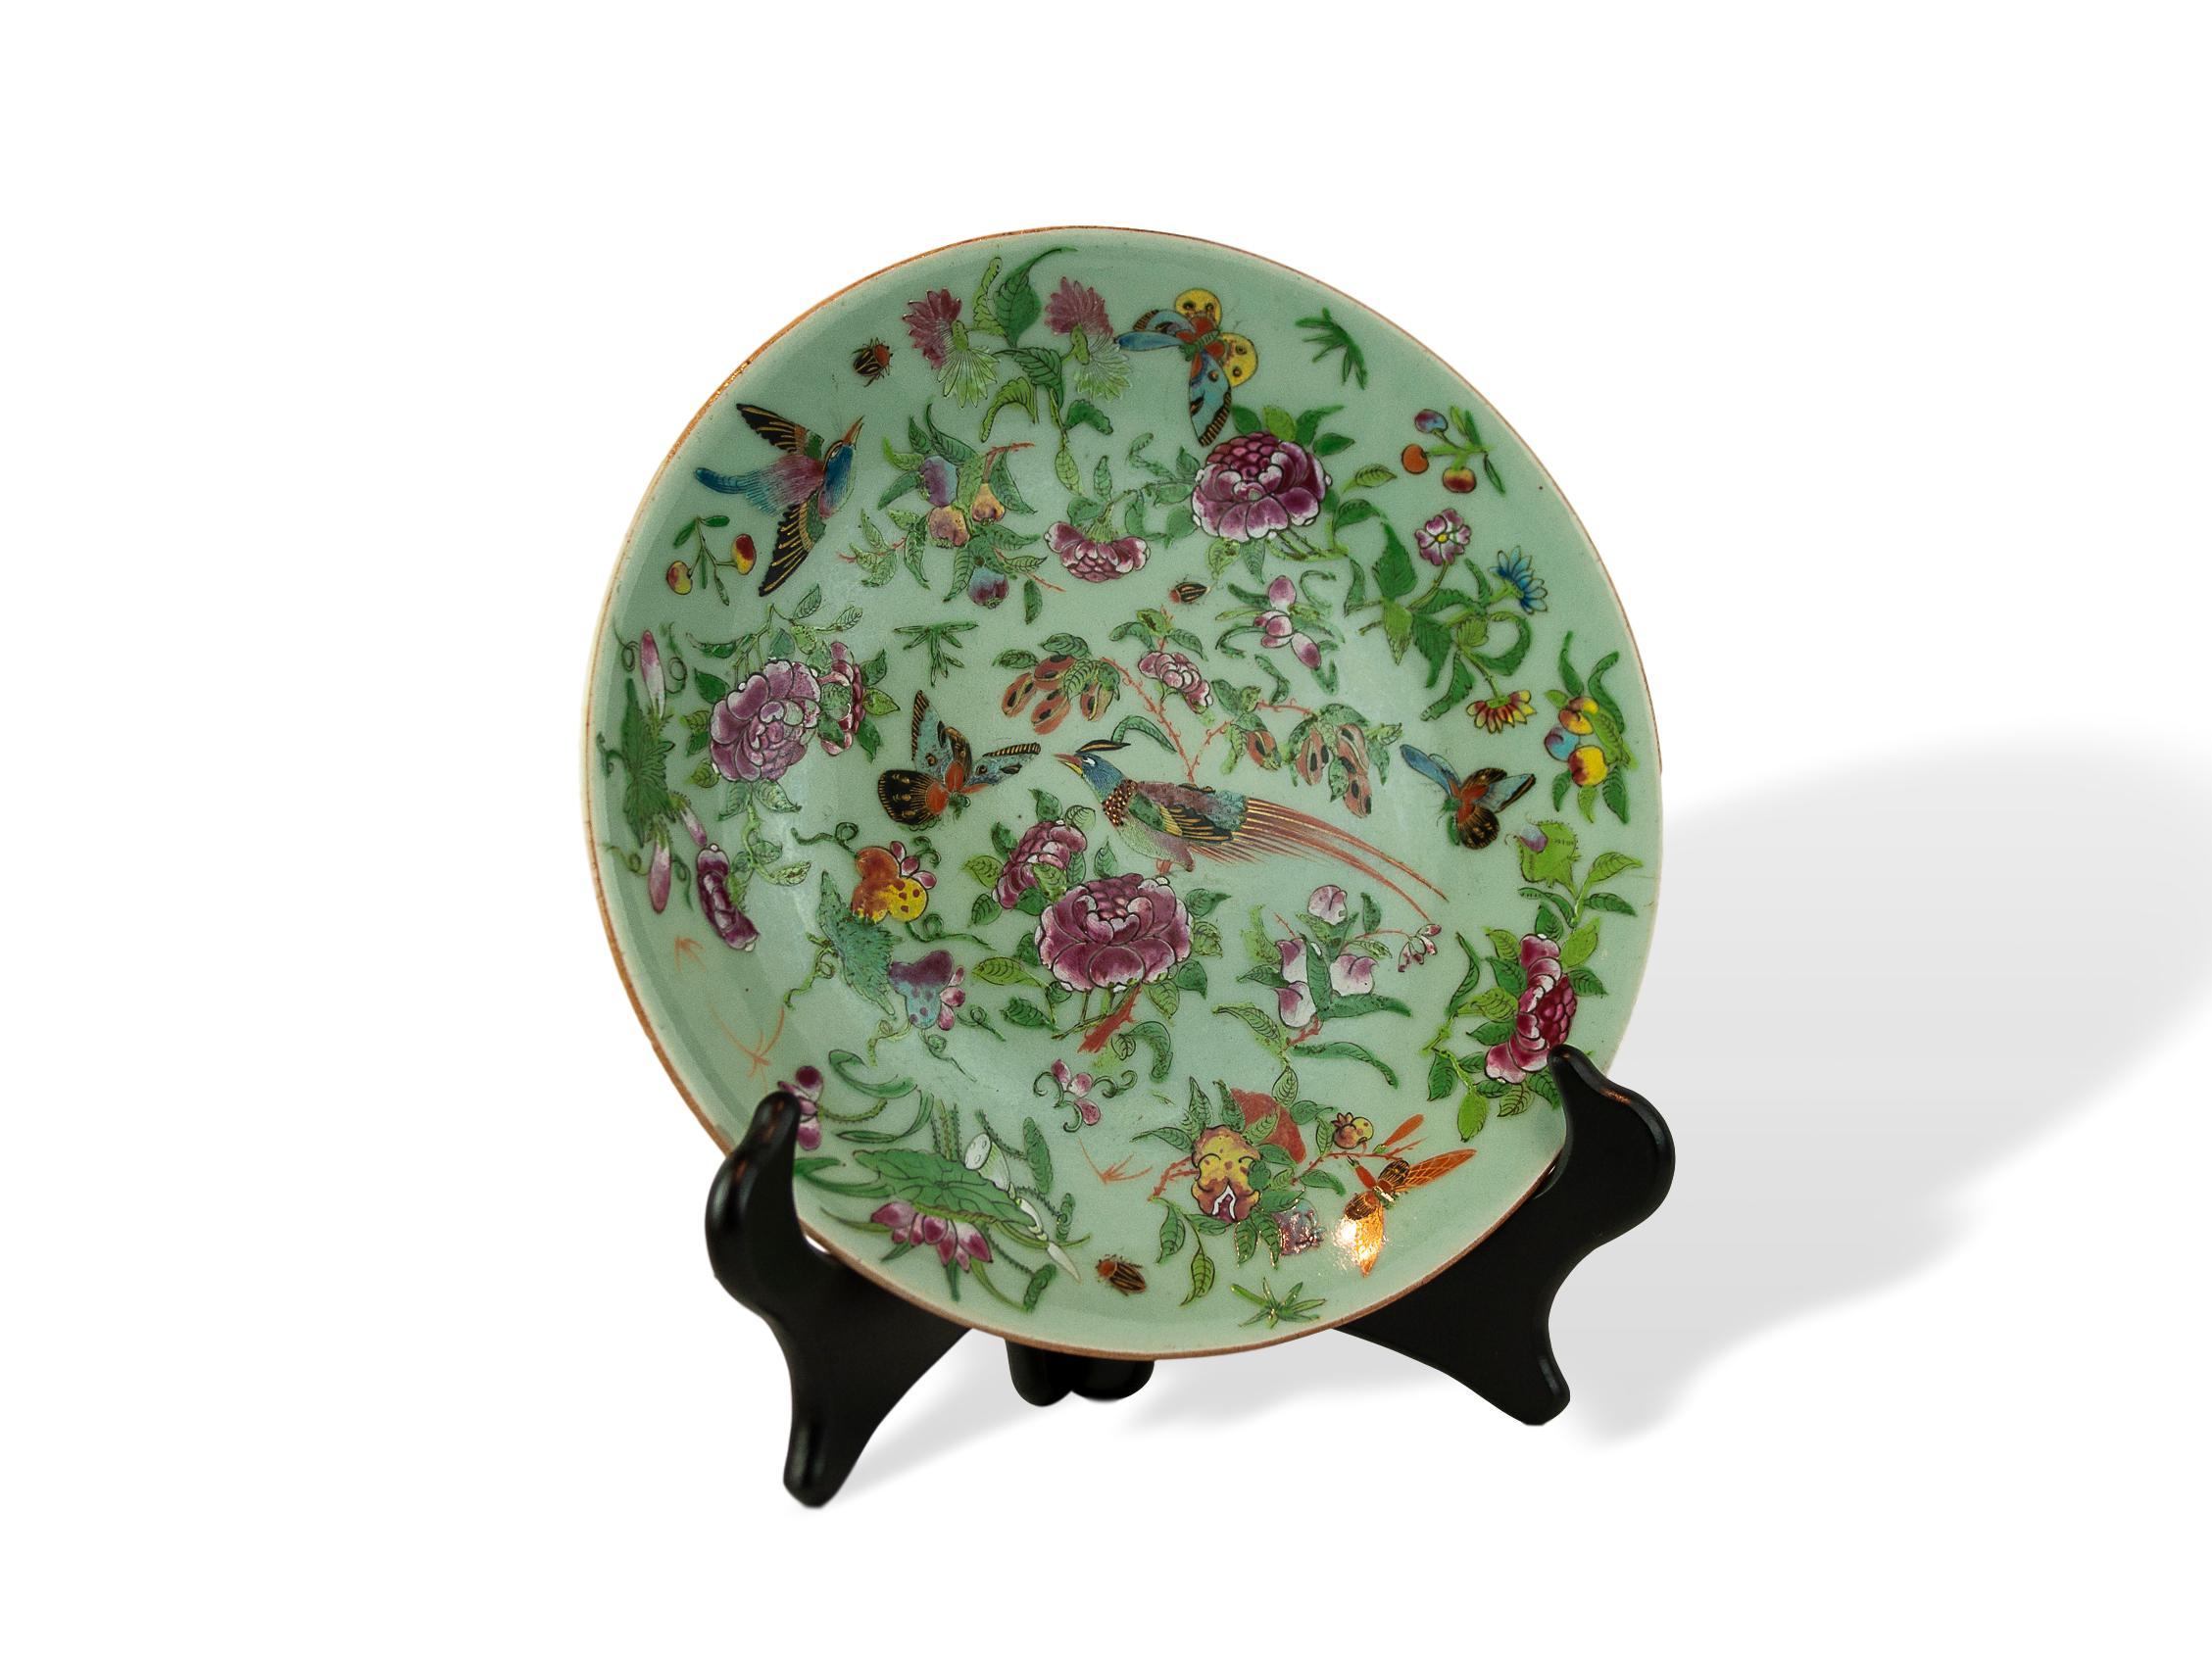 Chinese Celadon Famille Rose 9.75 inch plate, Canton, circa 1850, enameled with stylized pheasants, floral and fruit sprays, crickets and a single gilded dragonfly (rare), reserved on a celadon ground. Underglaze blue seal mark. Exceptional color,